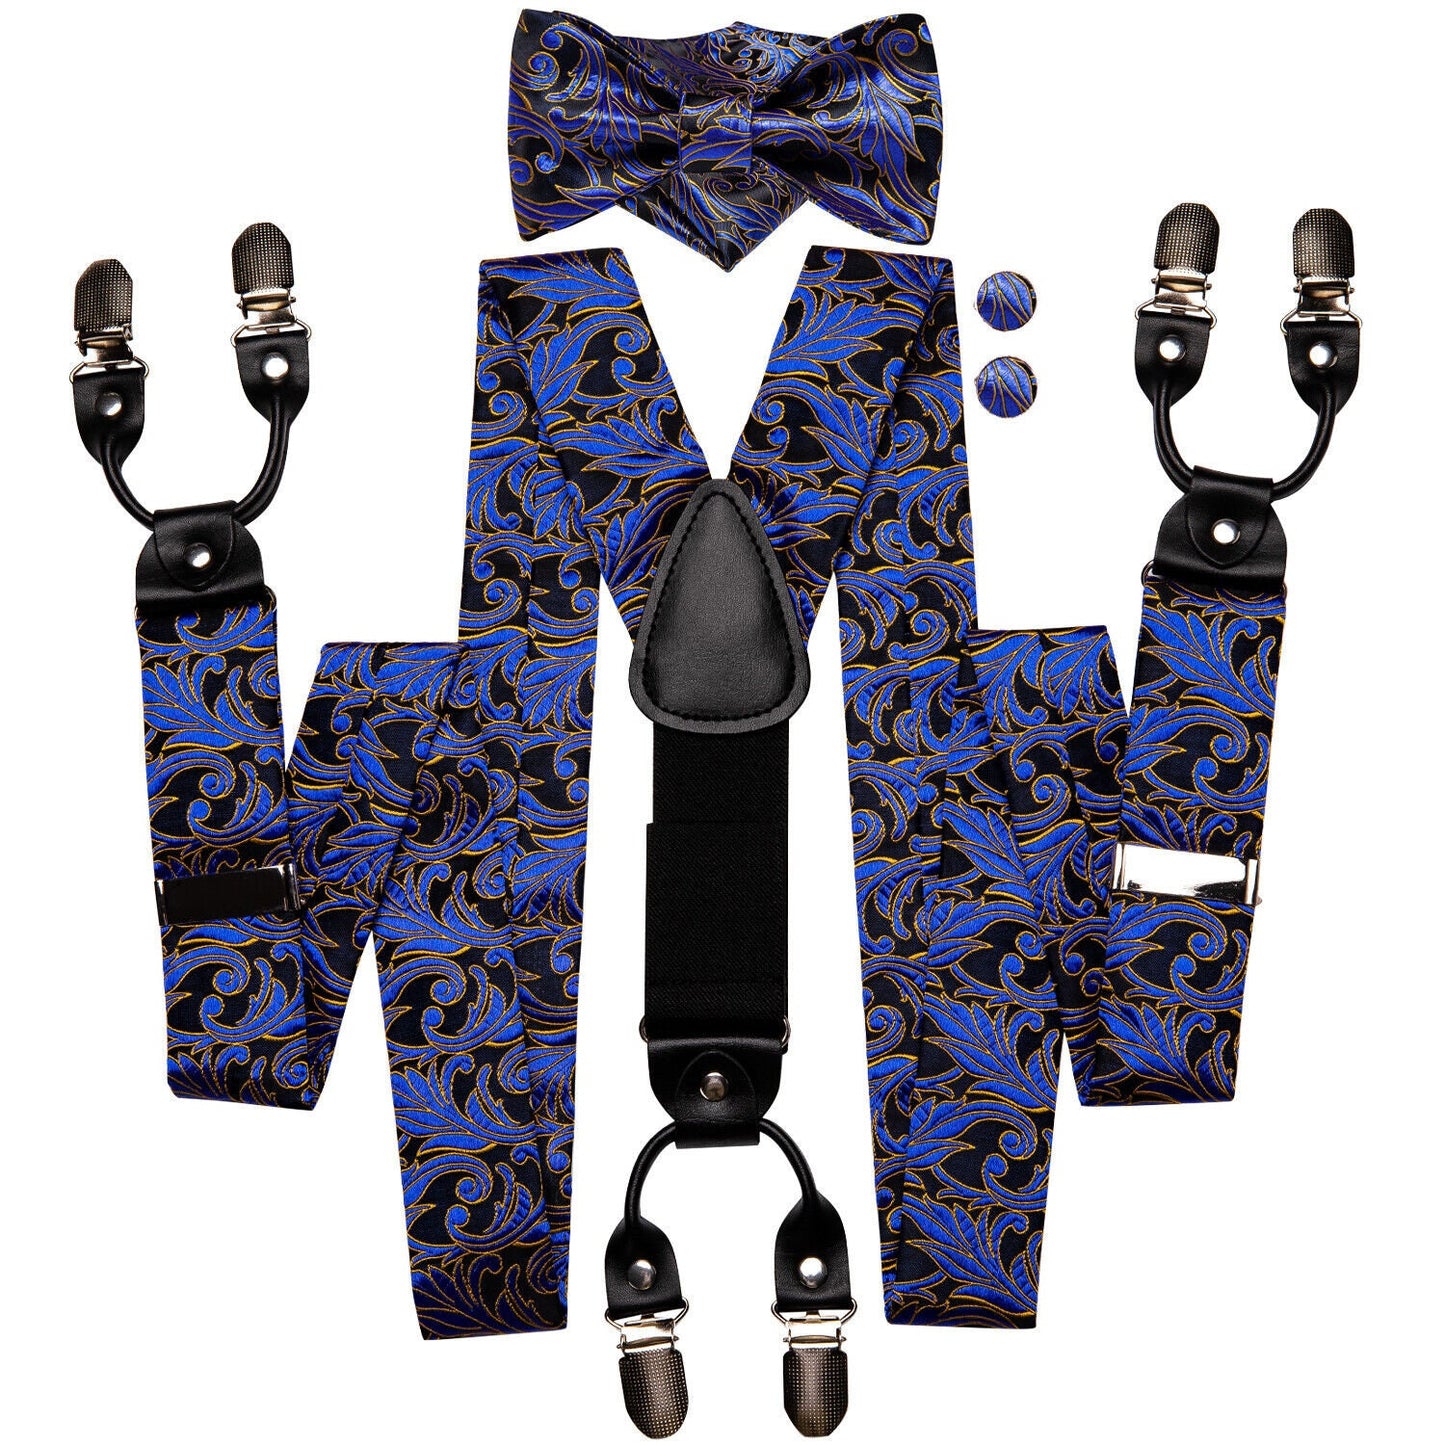 Hi Tie® Msg me the color Men Paisley Suspender and Bow Tie Set with Floral Pocket Square Y Shape 6 Clips Braces Christmas Wedding